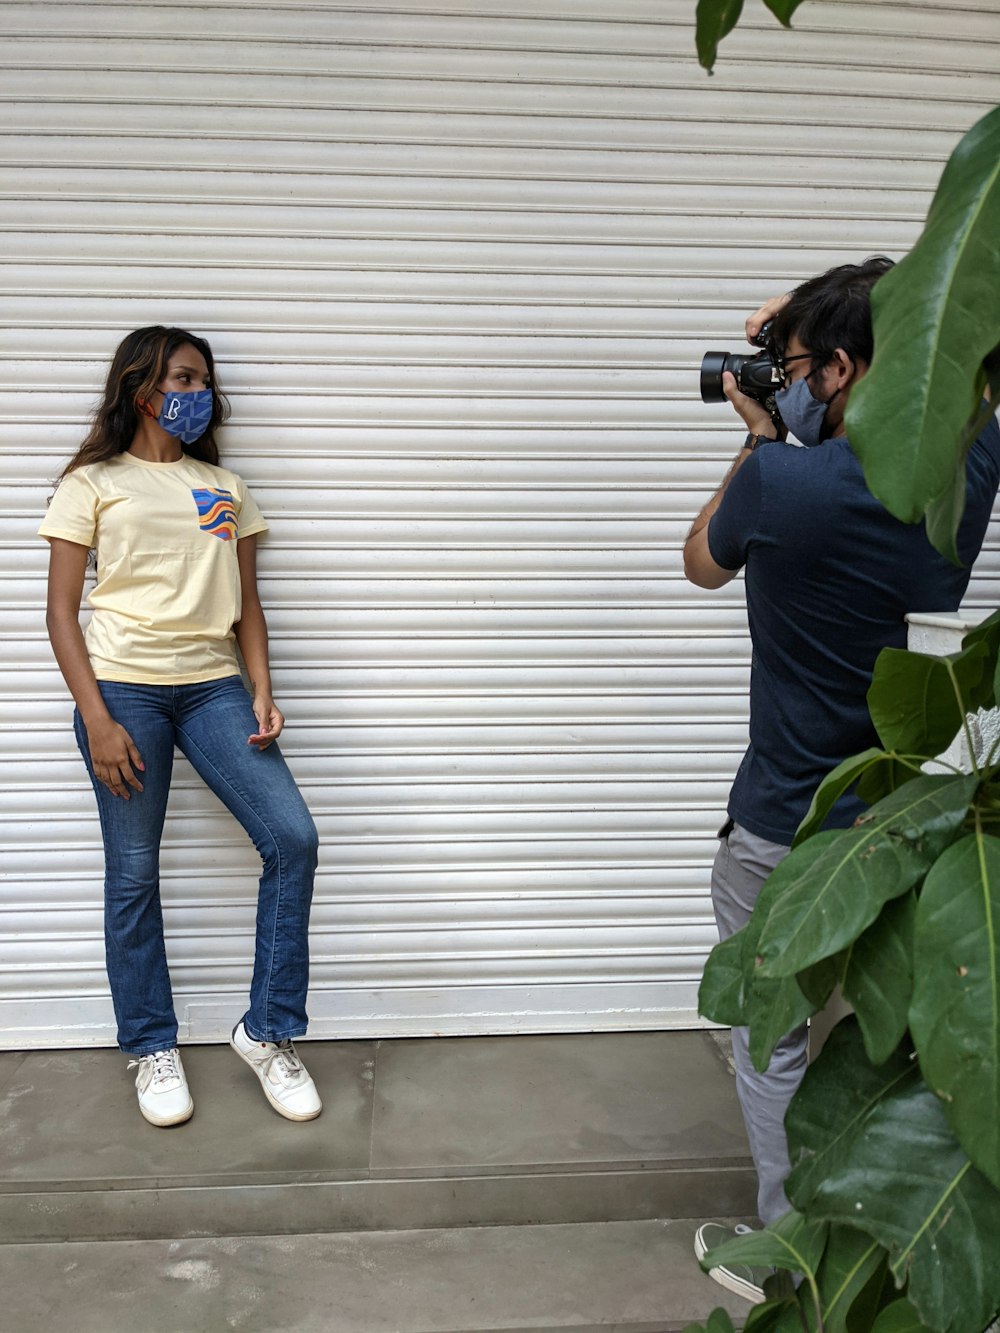 woman in yellow shirt and blue denim jeans holding black dslr camera